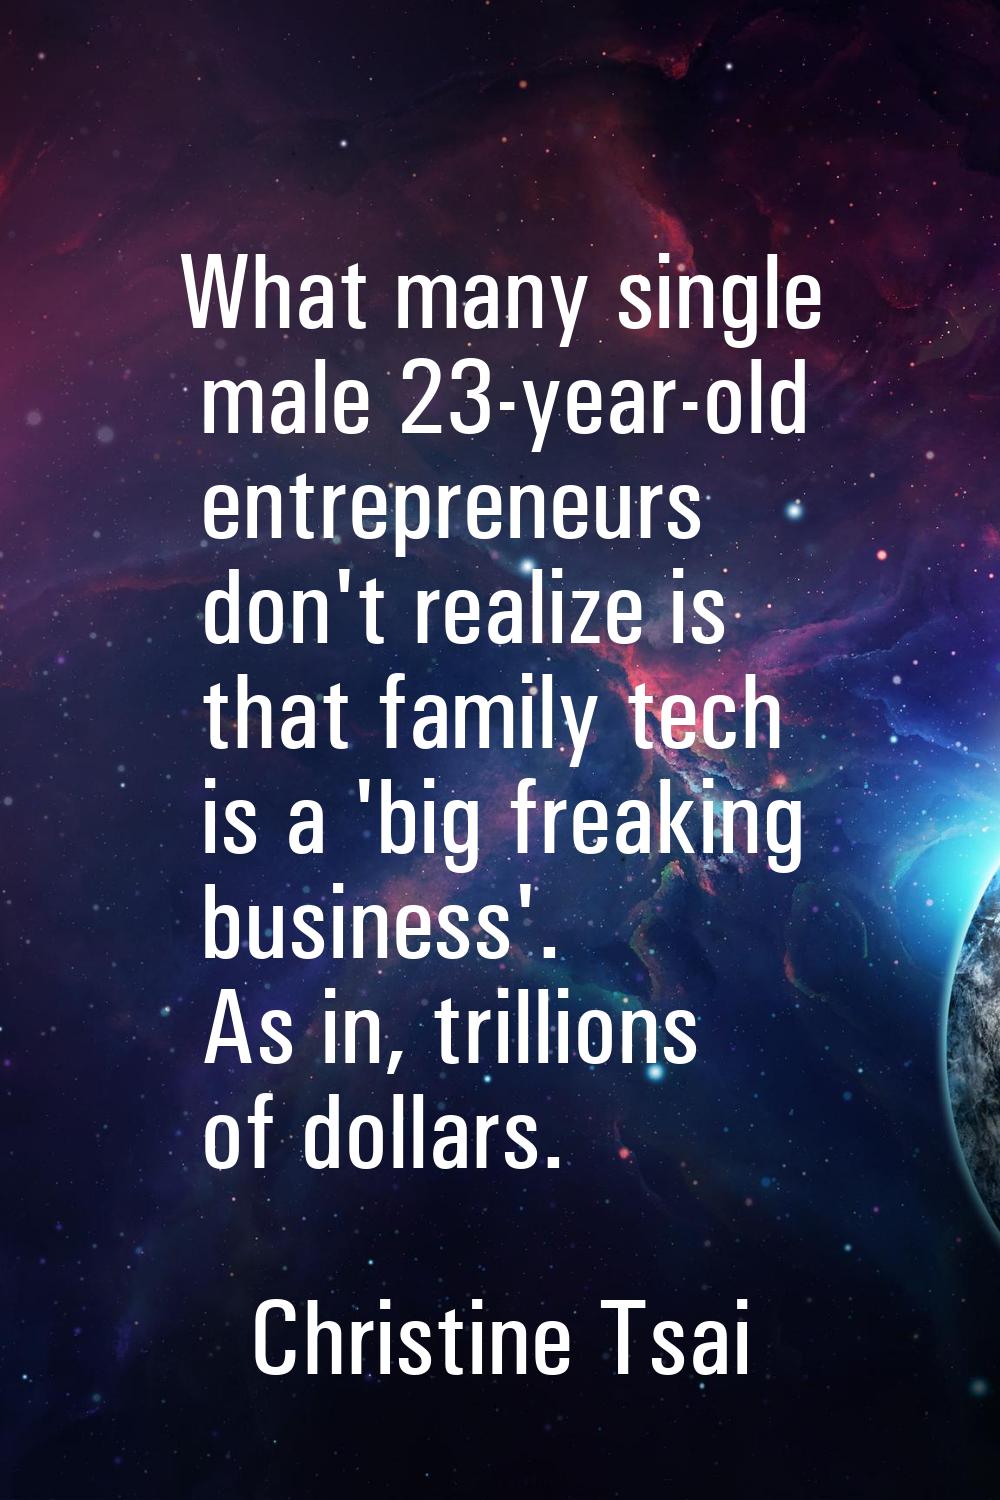 What many single male 23-year-old entrepreneurs don't realize is that family tech is a 'big freakin